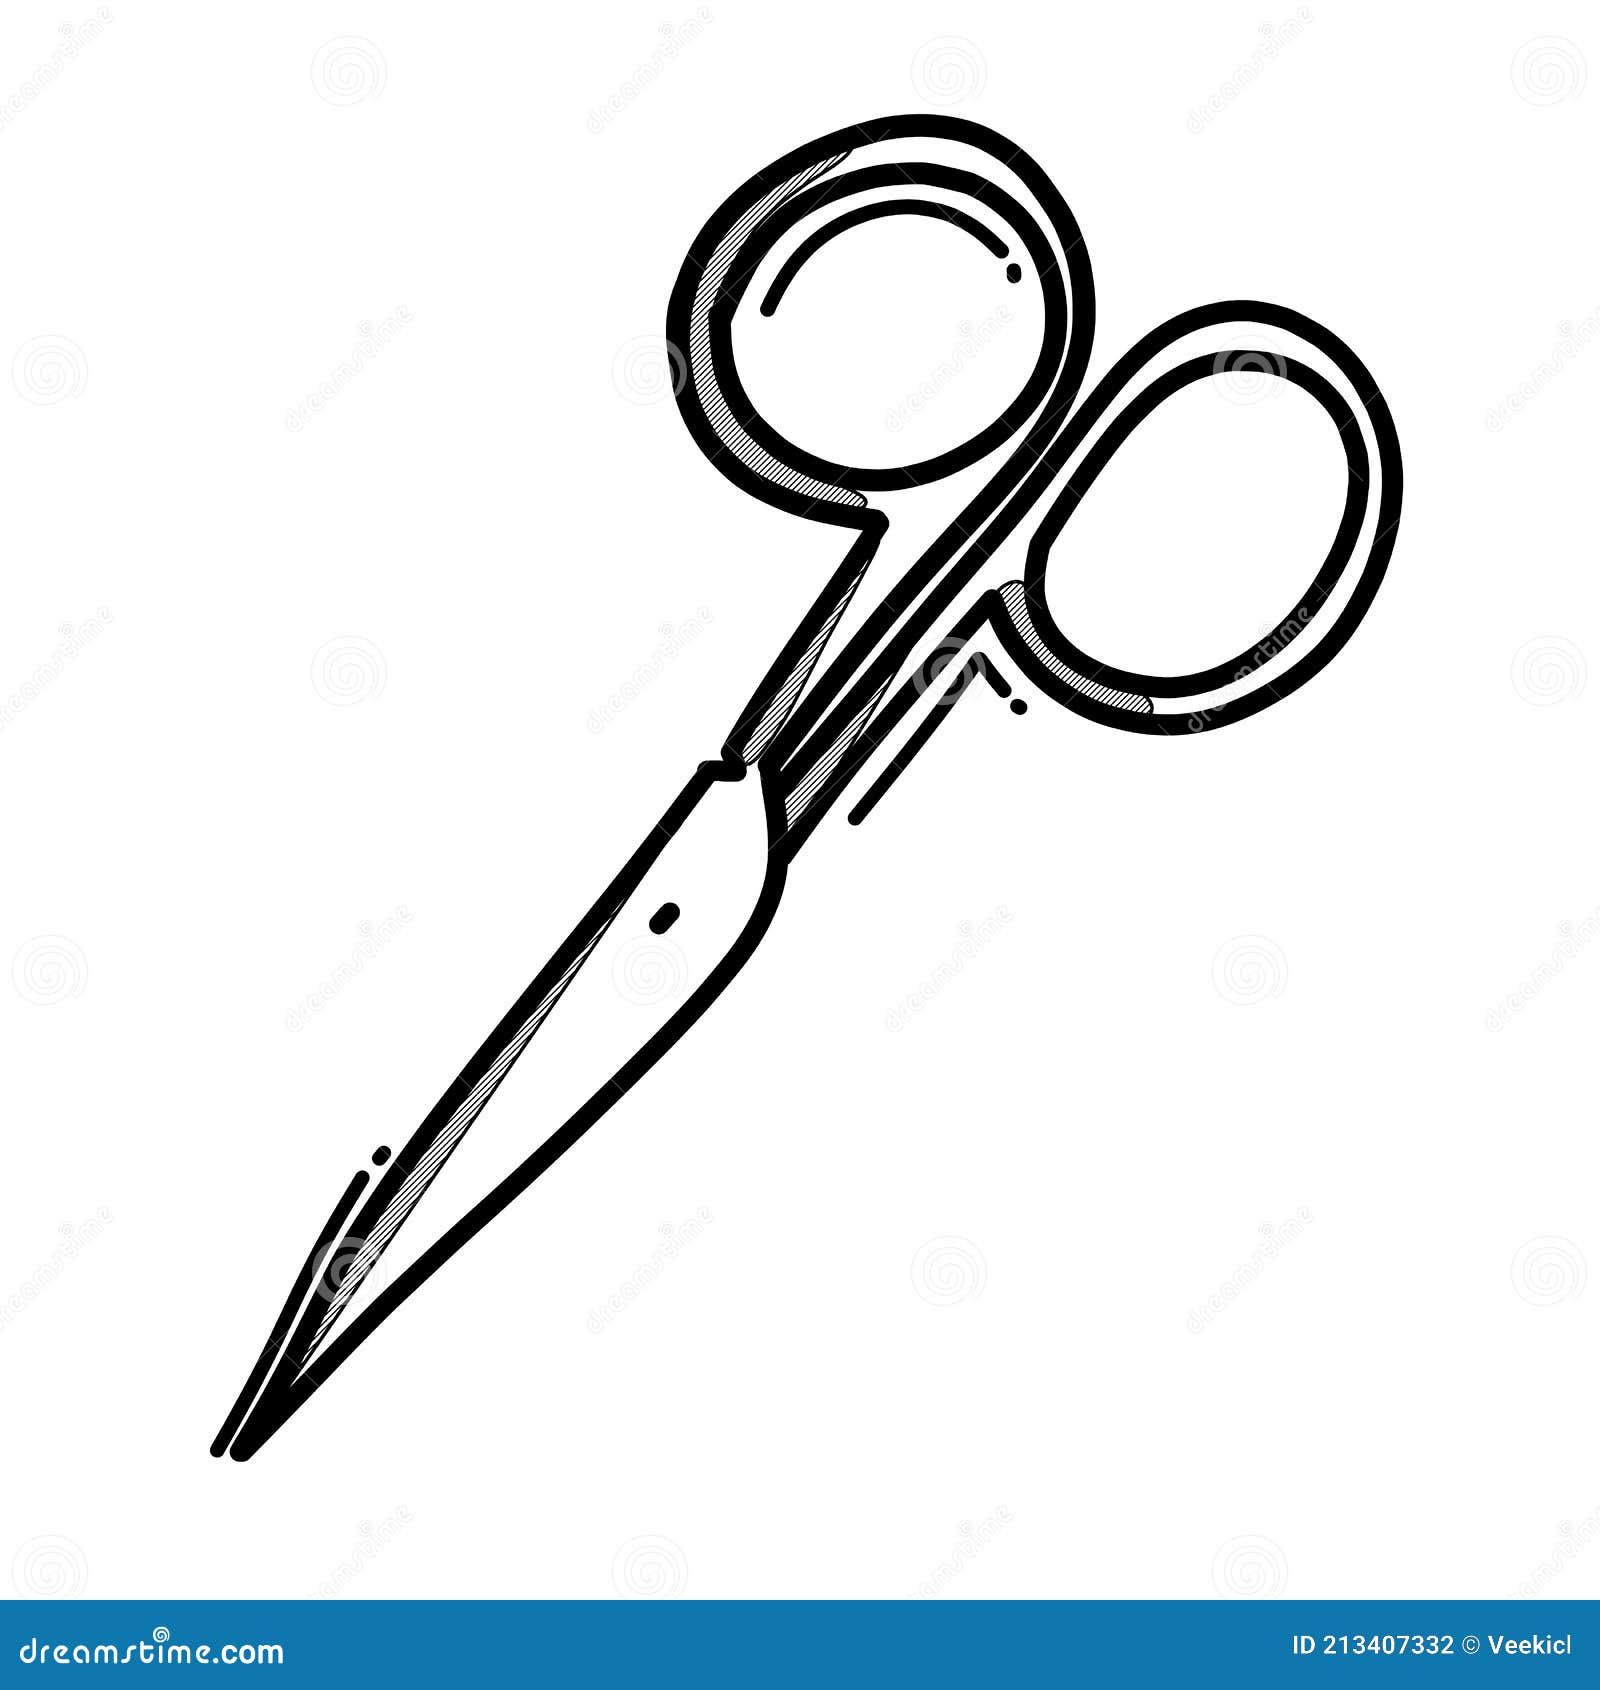 Icon Scissors Drawing PNG Transparent Background, Free Download #25535 -  FreeIconsPNG